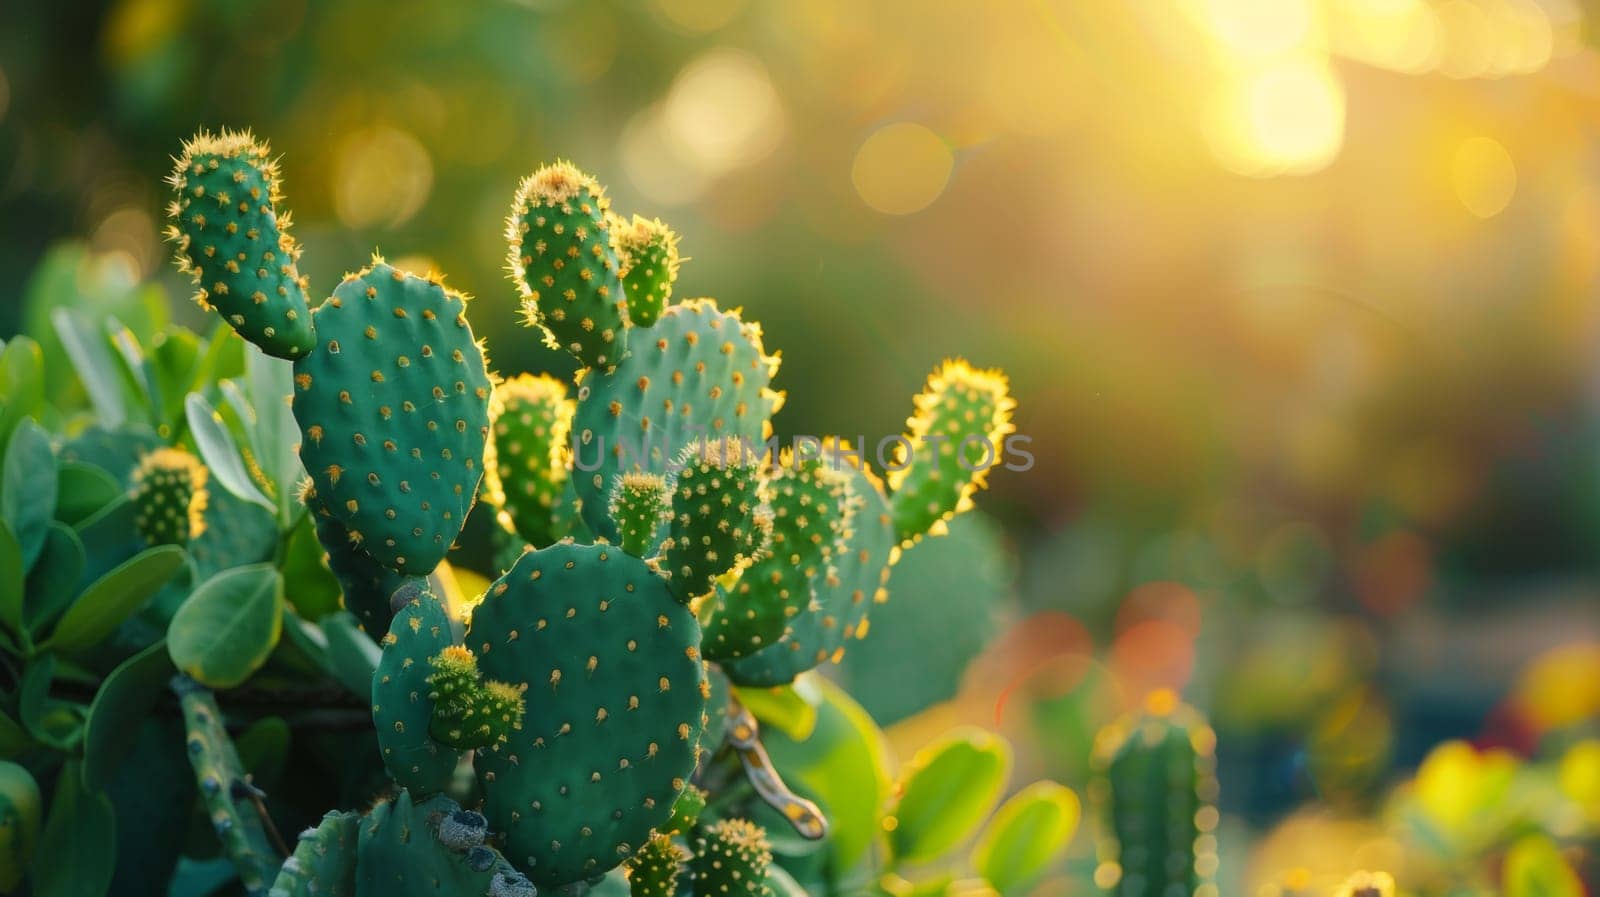 A close up of a cactus plant with many small green leaves, AI by starush